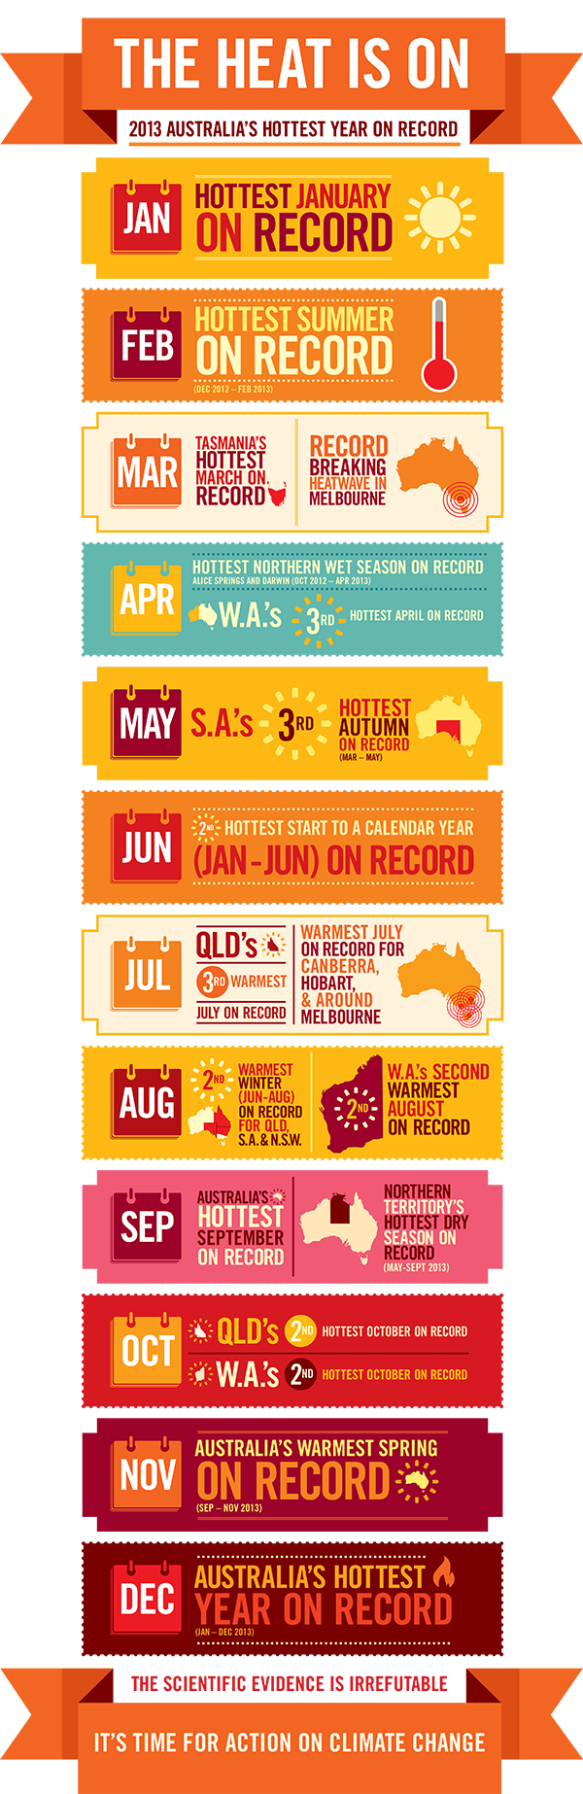 Infographic by the Climate Council. 